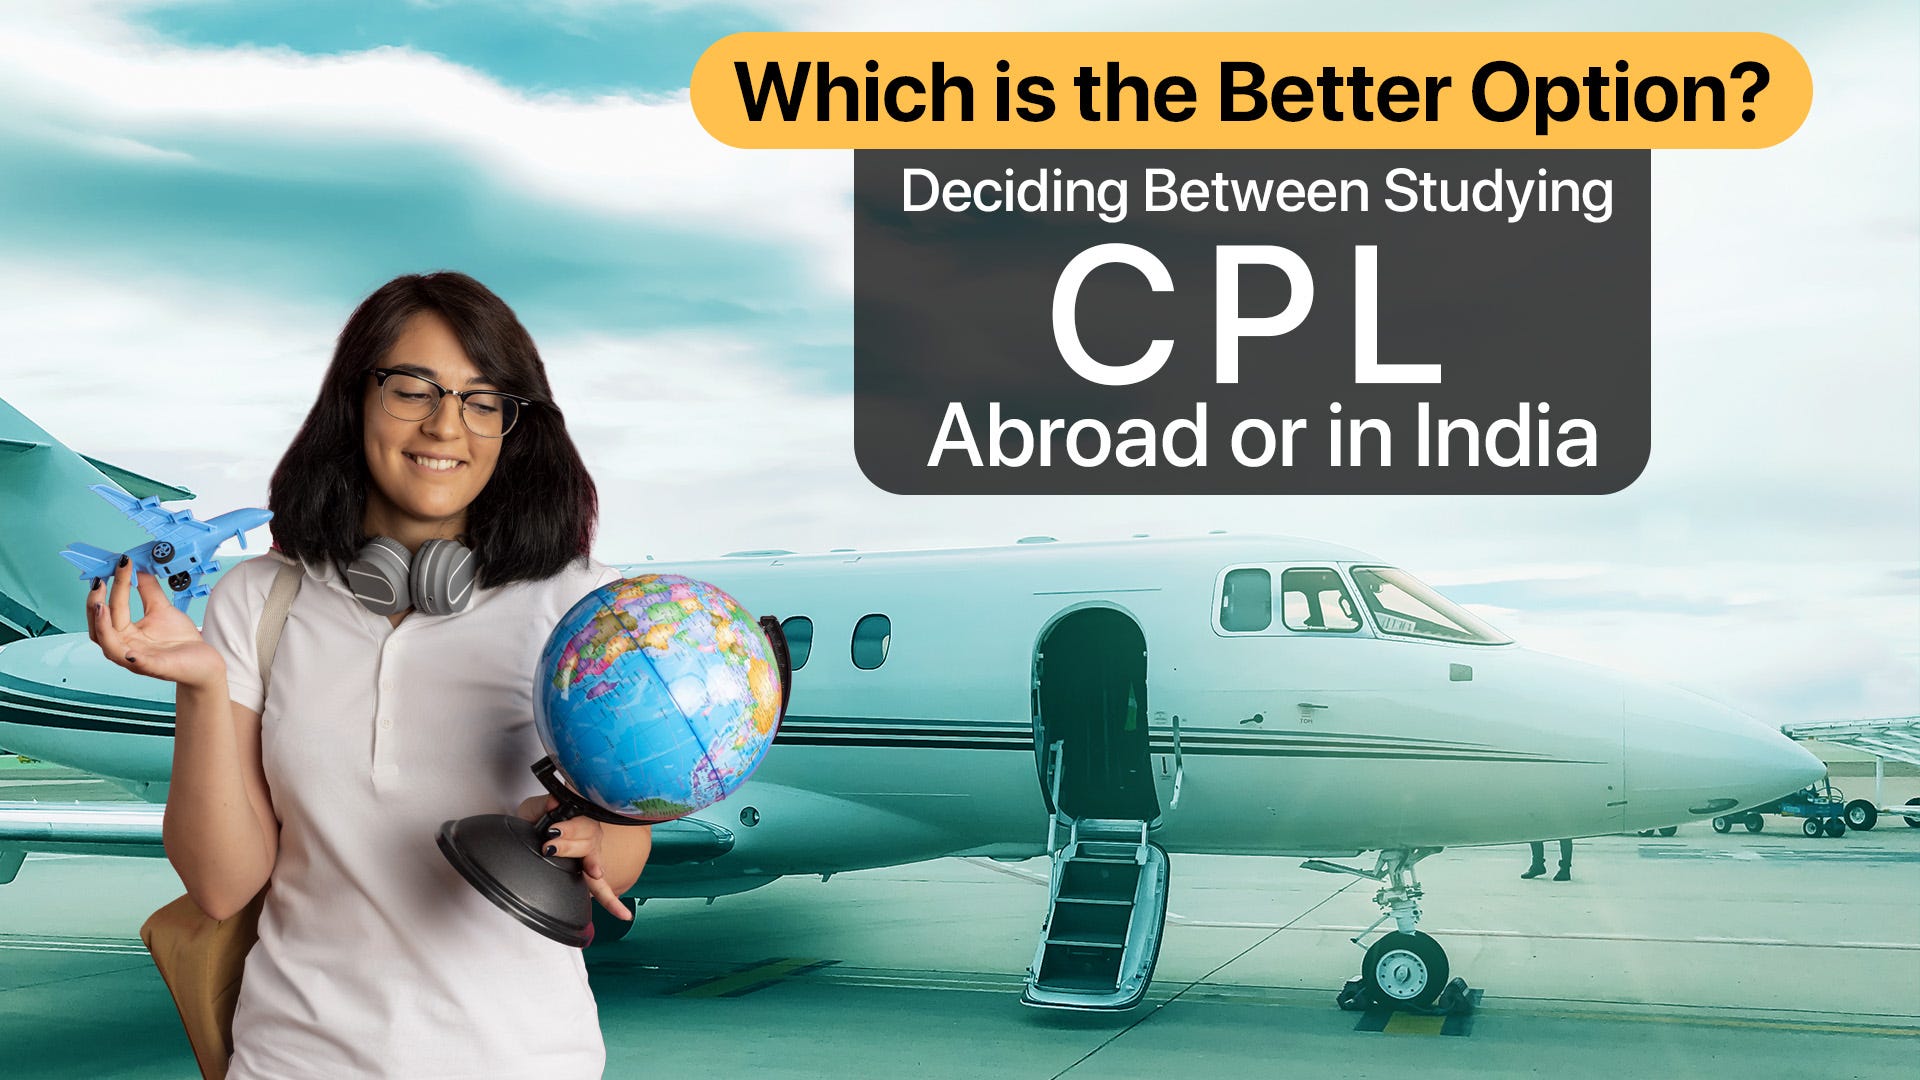 Deciding Between Studying CPL Abroad or in India: Which is the Better